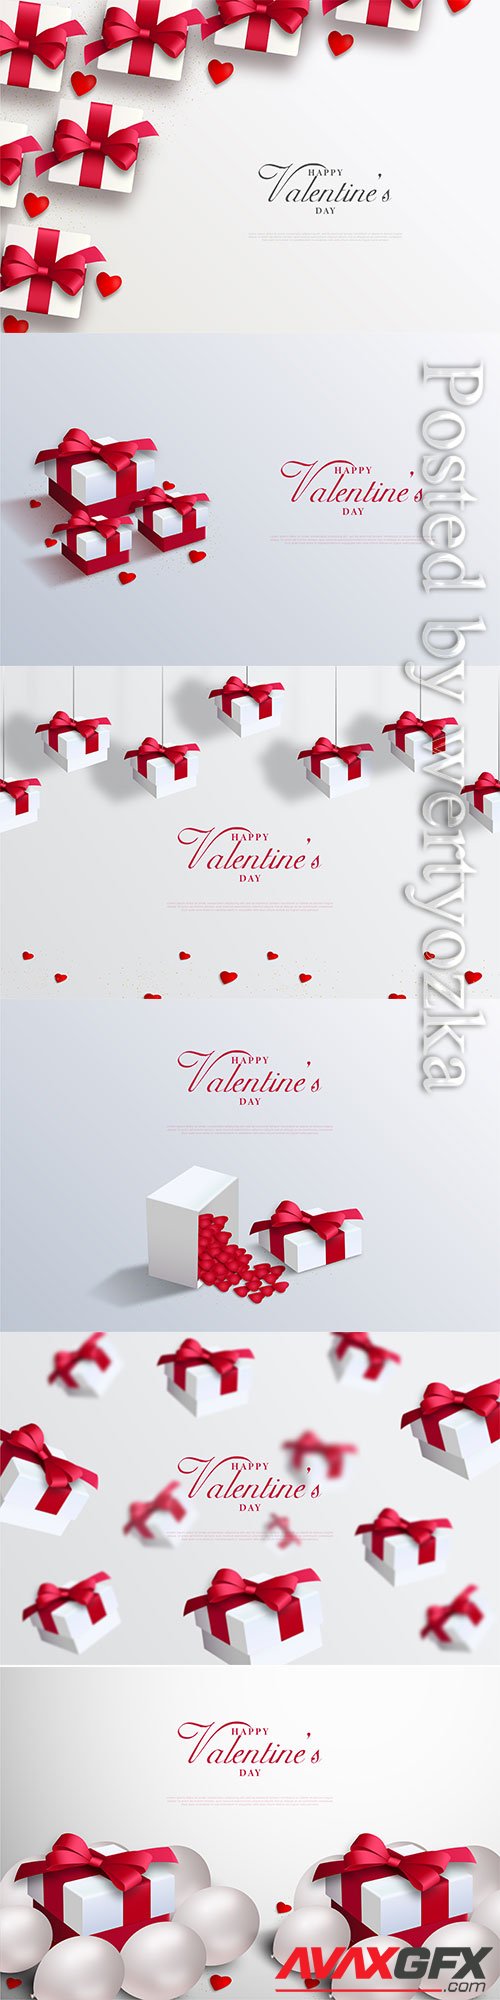 Valentine day vector card with love balloons and gift box